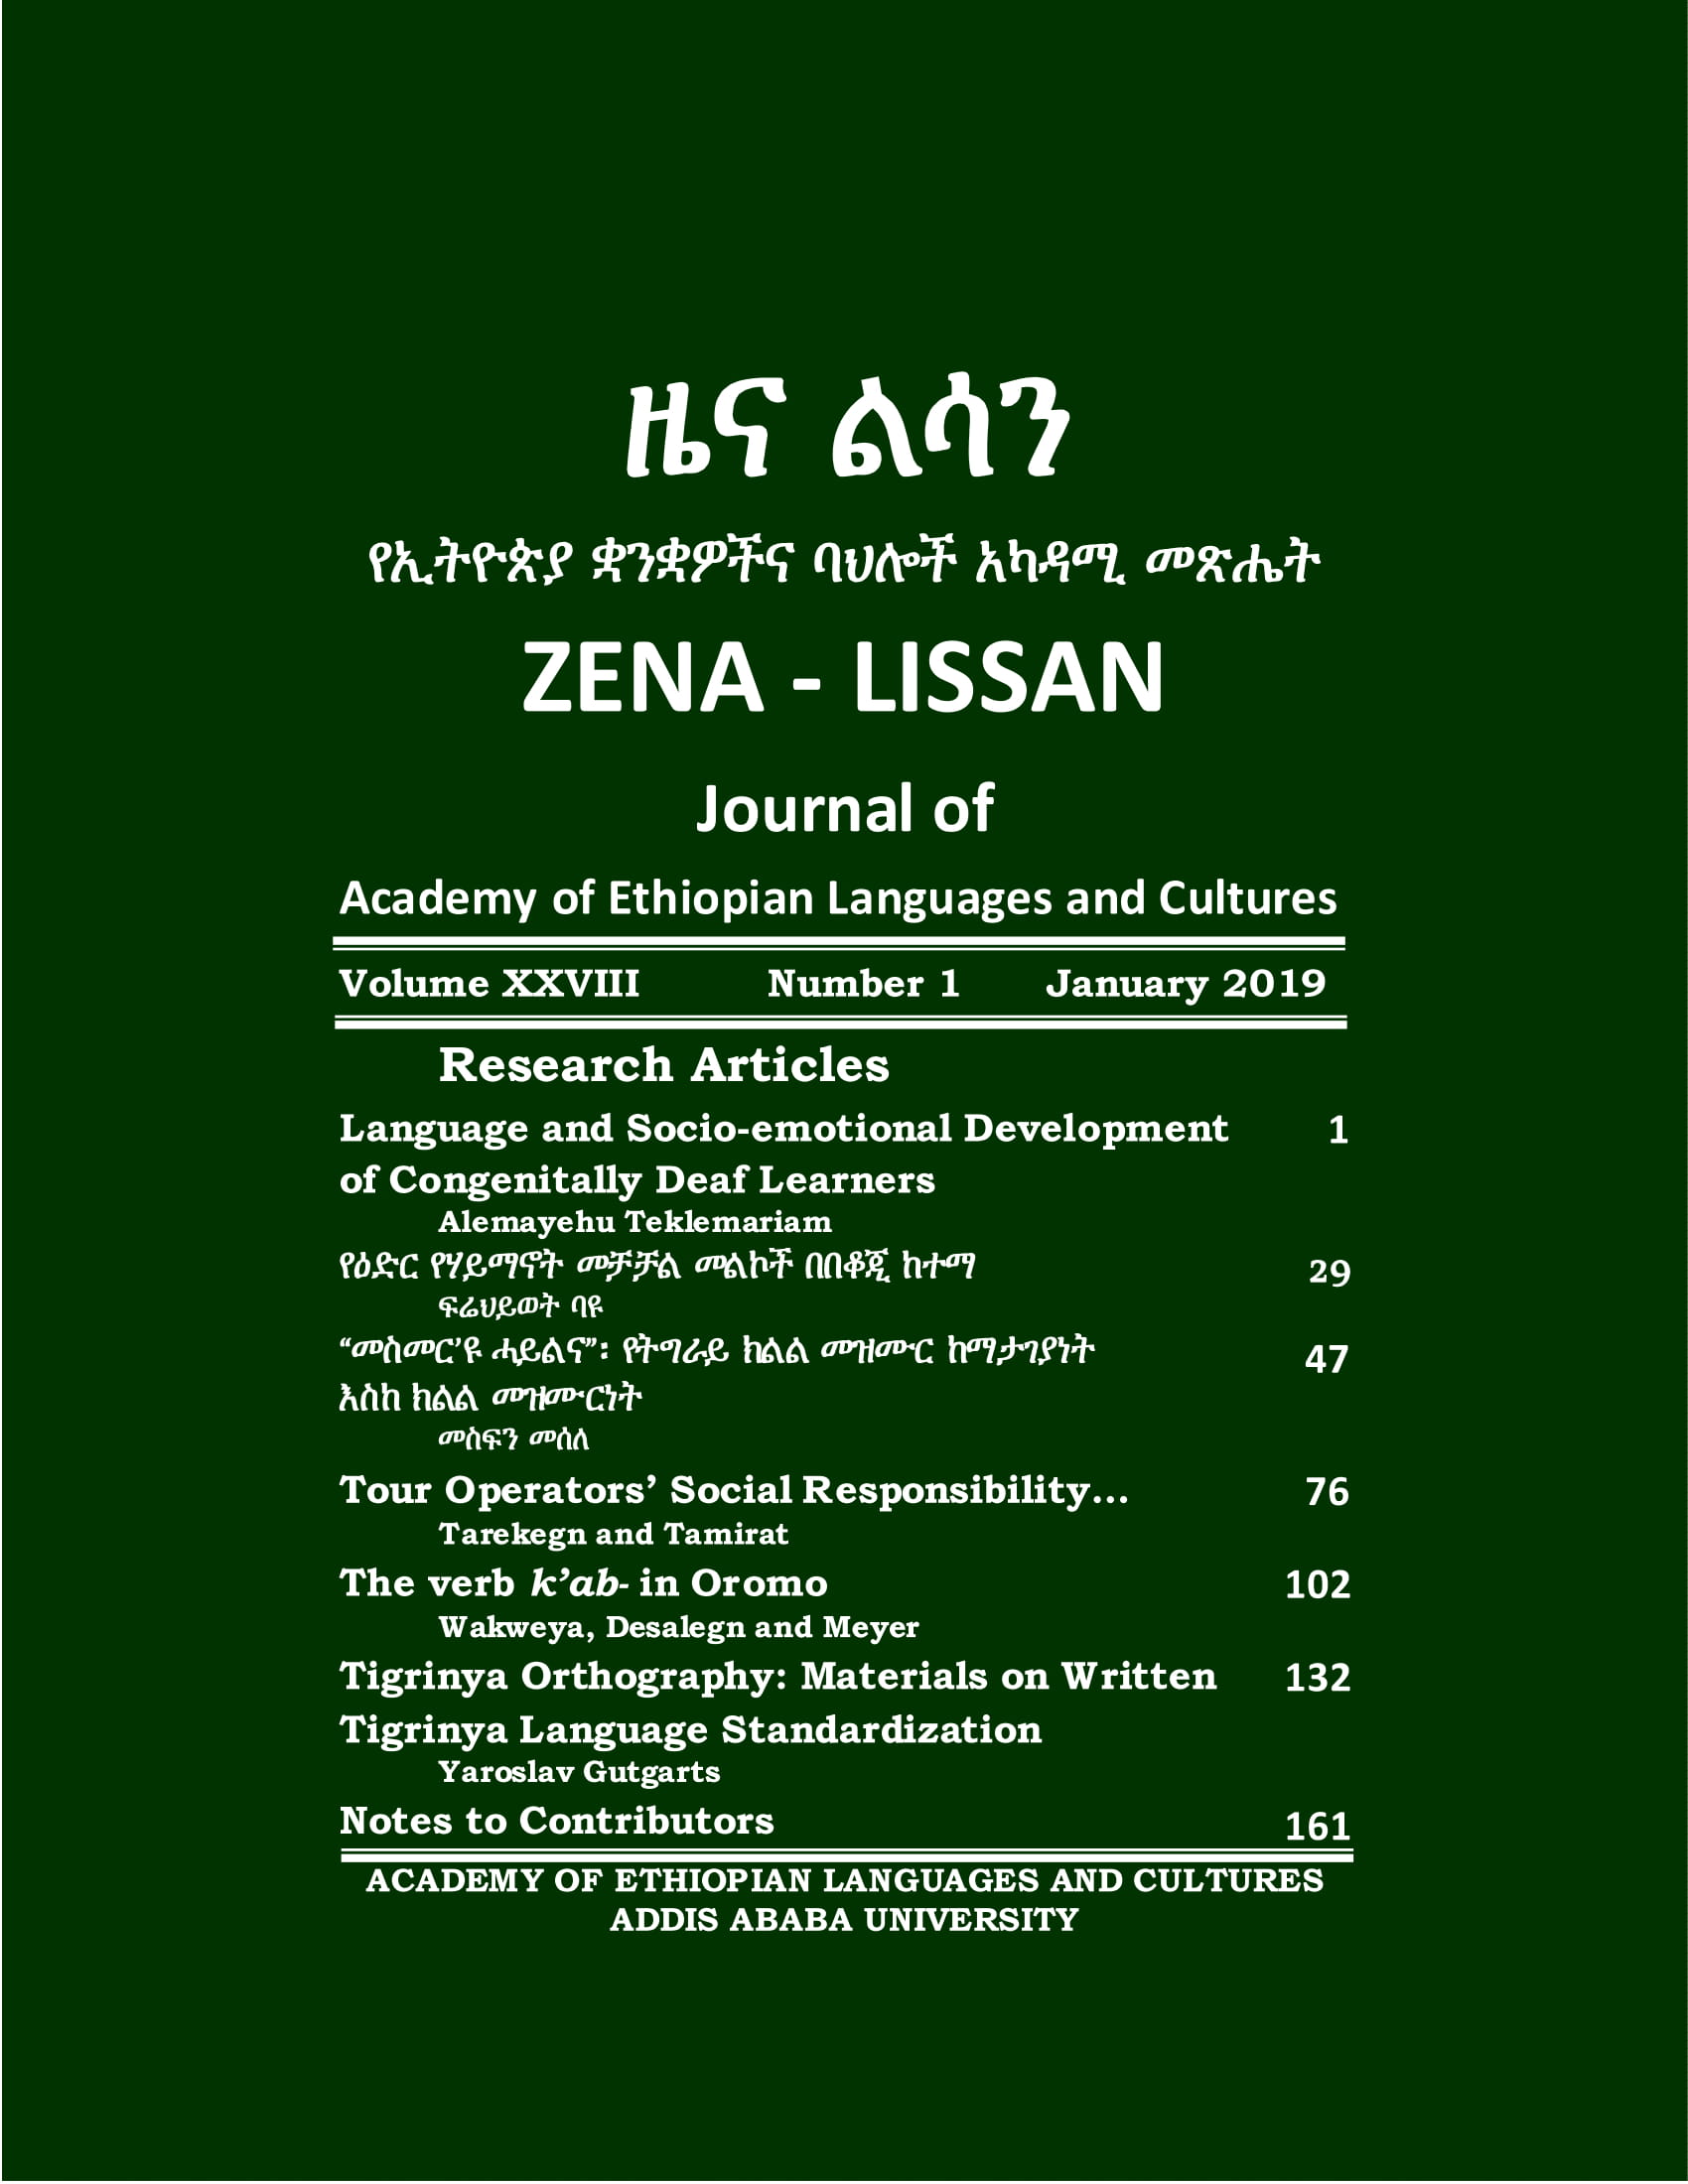 					View Vol. 28 No. 1 (2019): ZENA-LISSAN Journal of Ethiopian Languages and Cultures
				